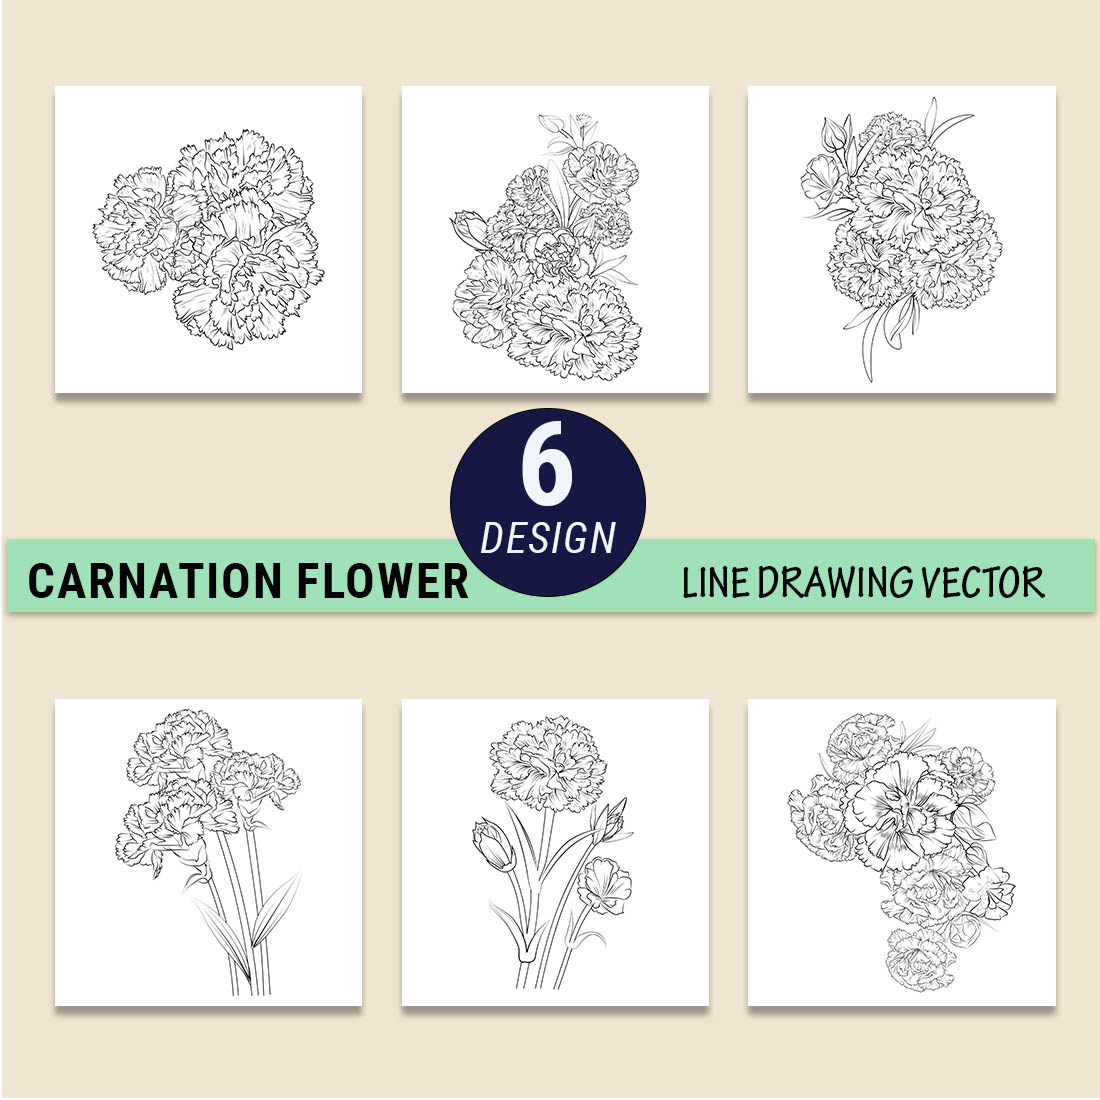 Tattoo carnation flower drawing, black carnation tattoo, detailed black carnation tattoo, outline black carnation tattoo, drawing carnation flower tattoo outline preview image.